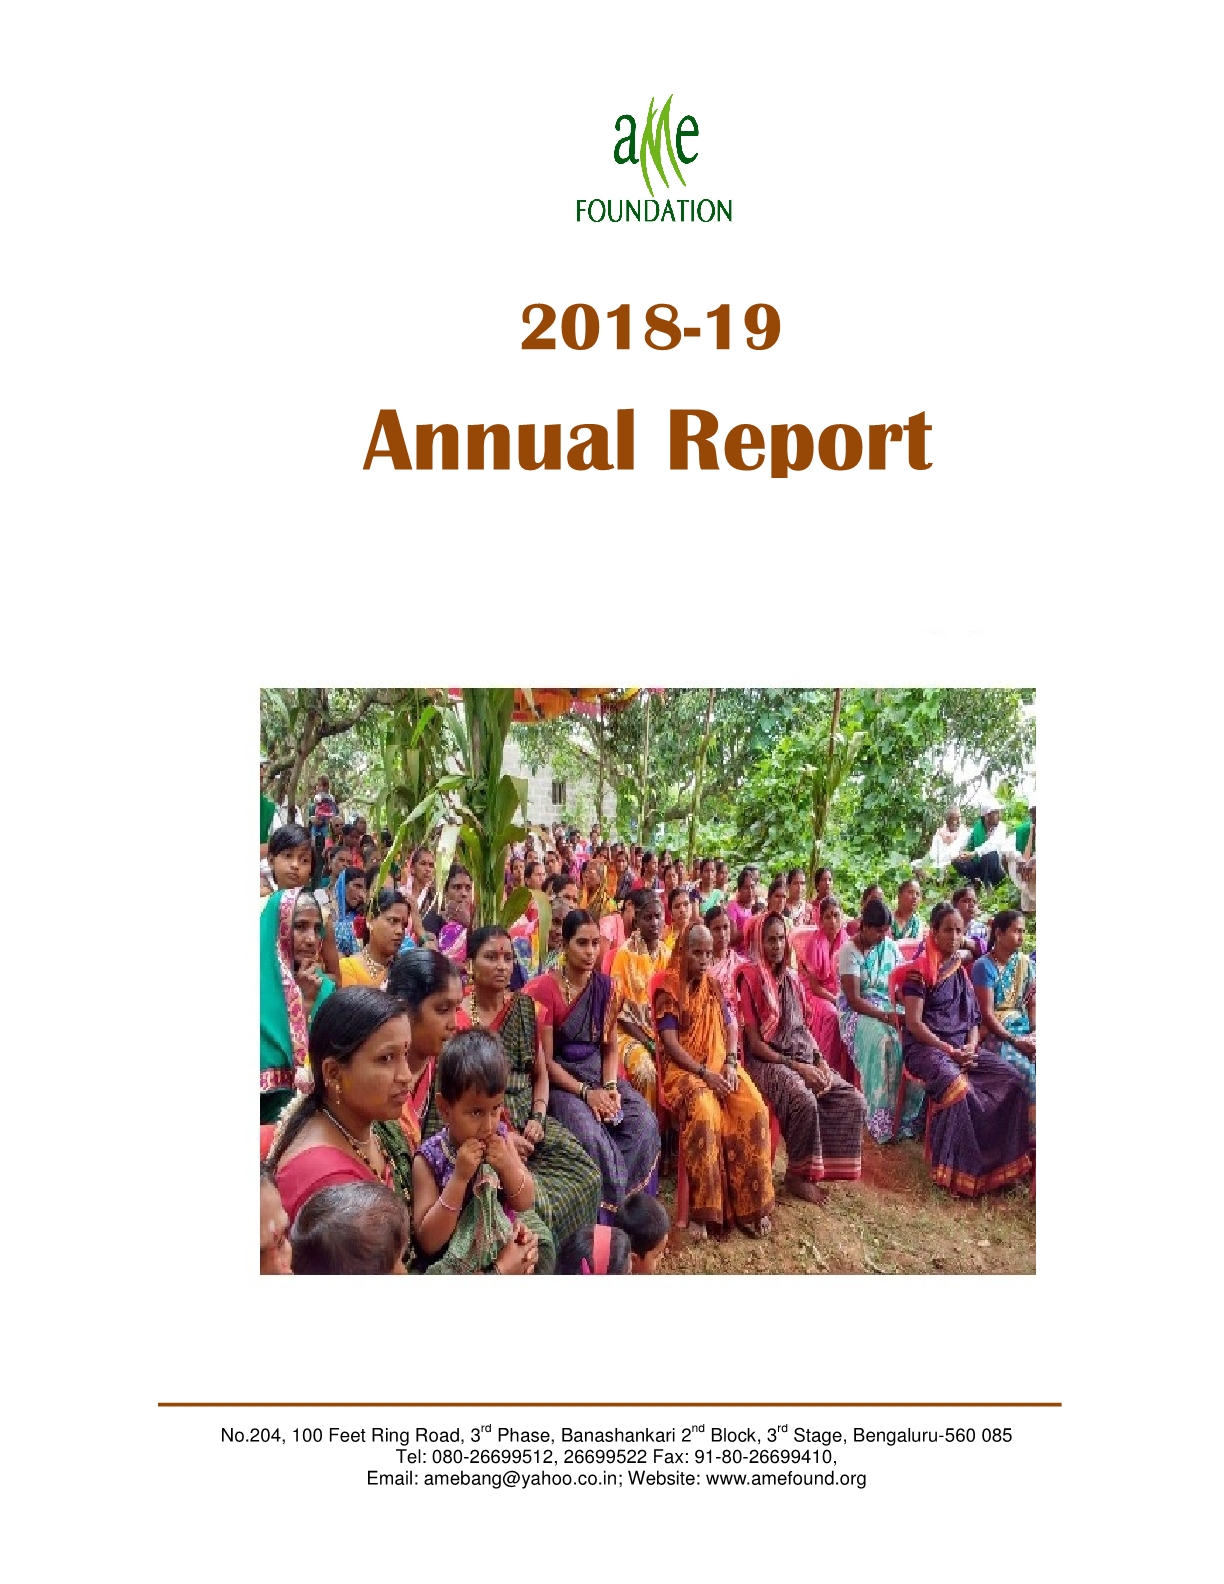 AME Annual Report Thumbnail